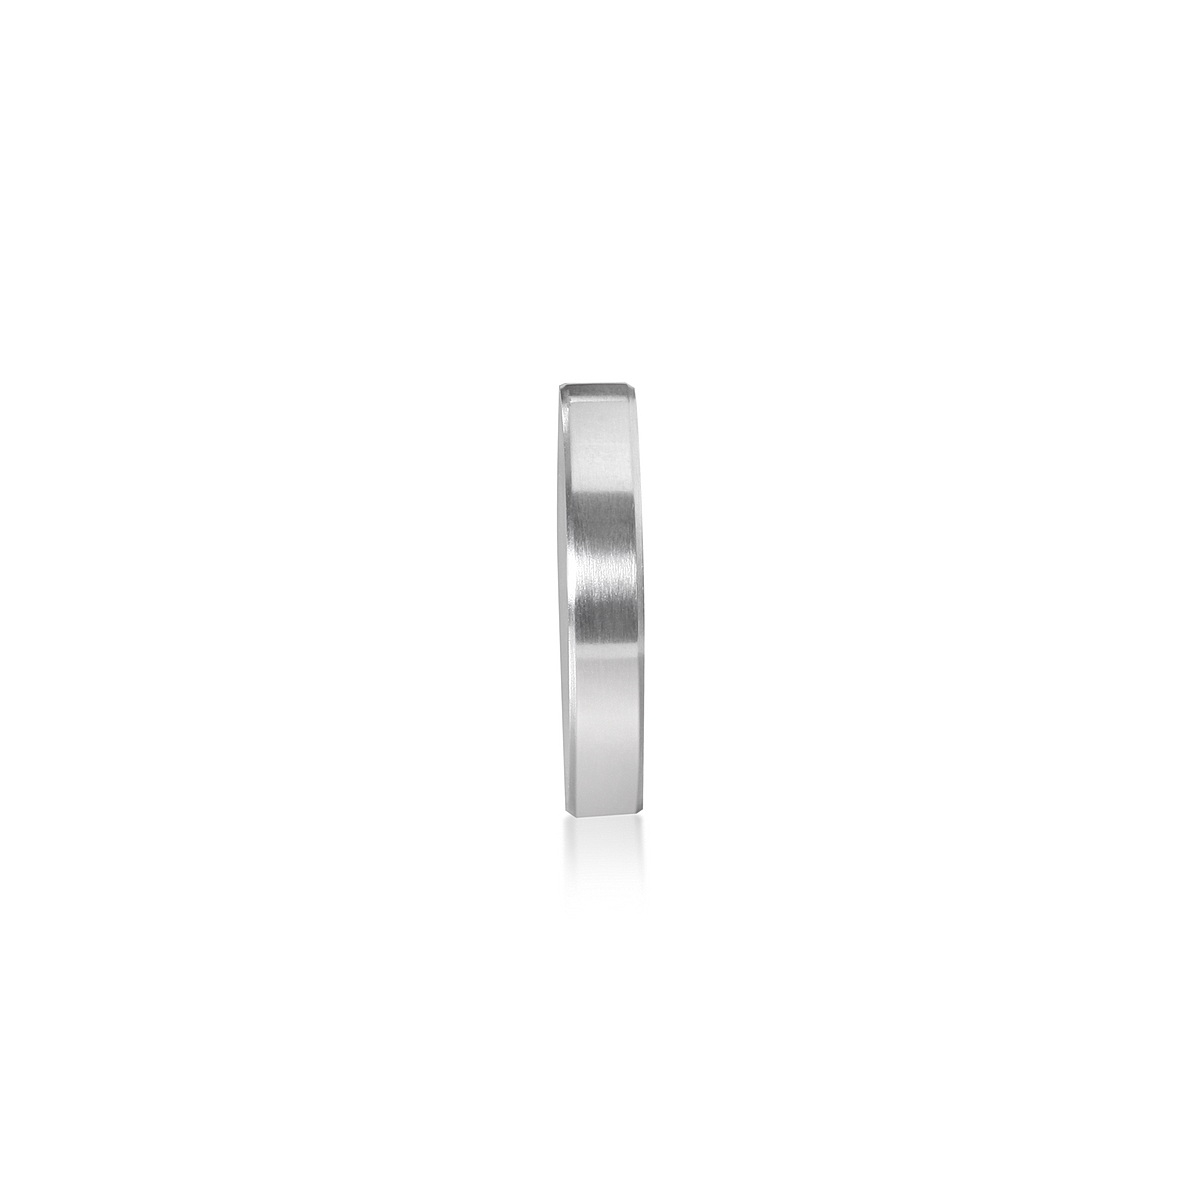 3/8-16 Threaded Barrels Diameter: 1 1/2'', Length: 1/4'',  Stainless Steel 304, Brushed Satin Finish [Required Material Hole Size: 3/8'' ]